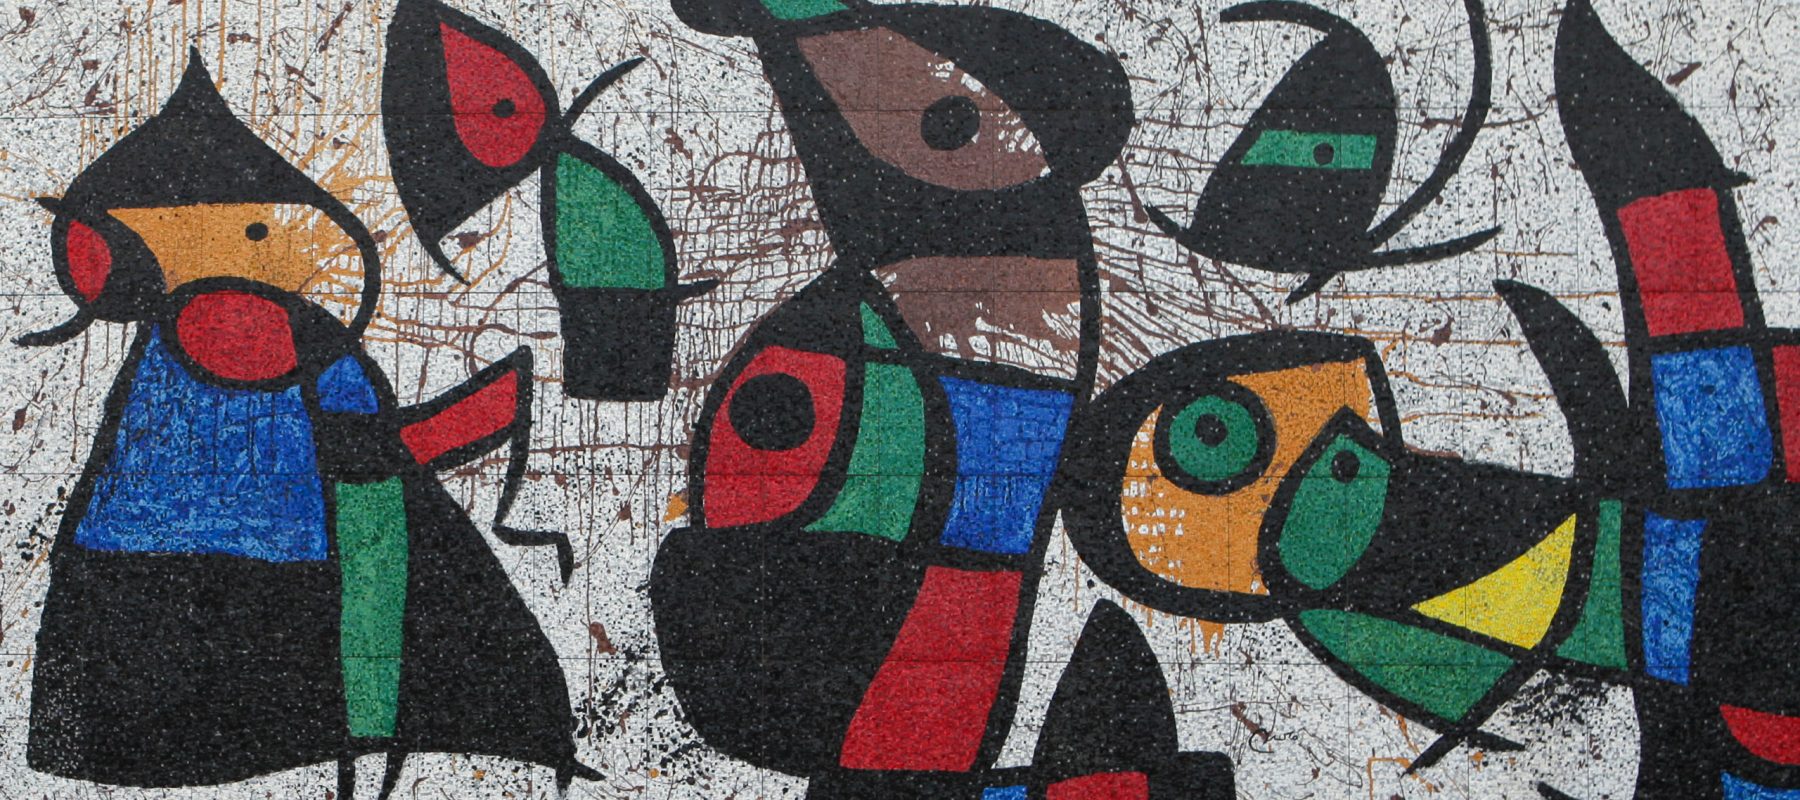 Personnages Oiseaux or Bird People, mural in tile on the side of the Ulrich Art Museum by Joan Miró